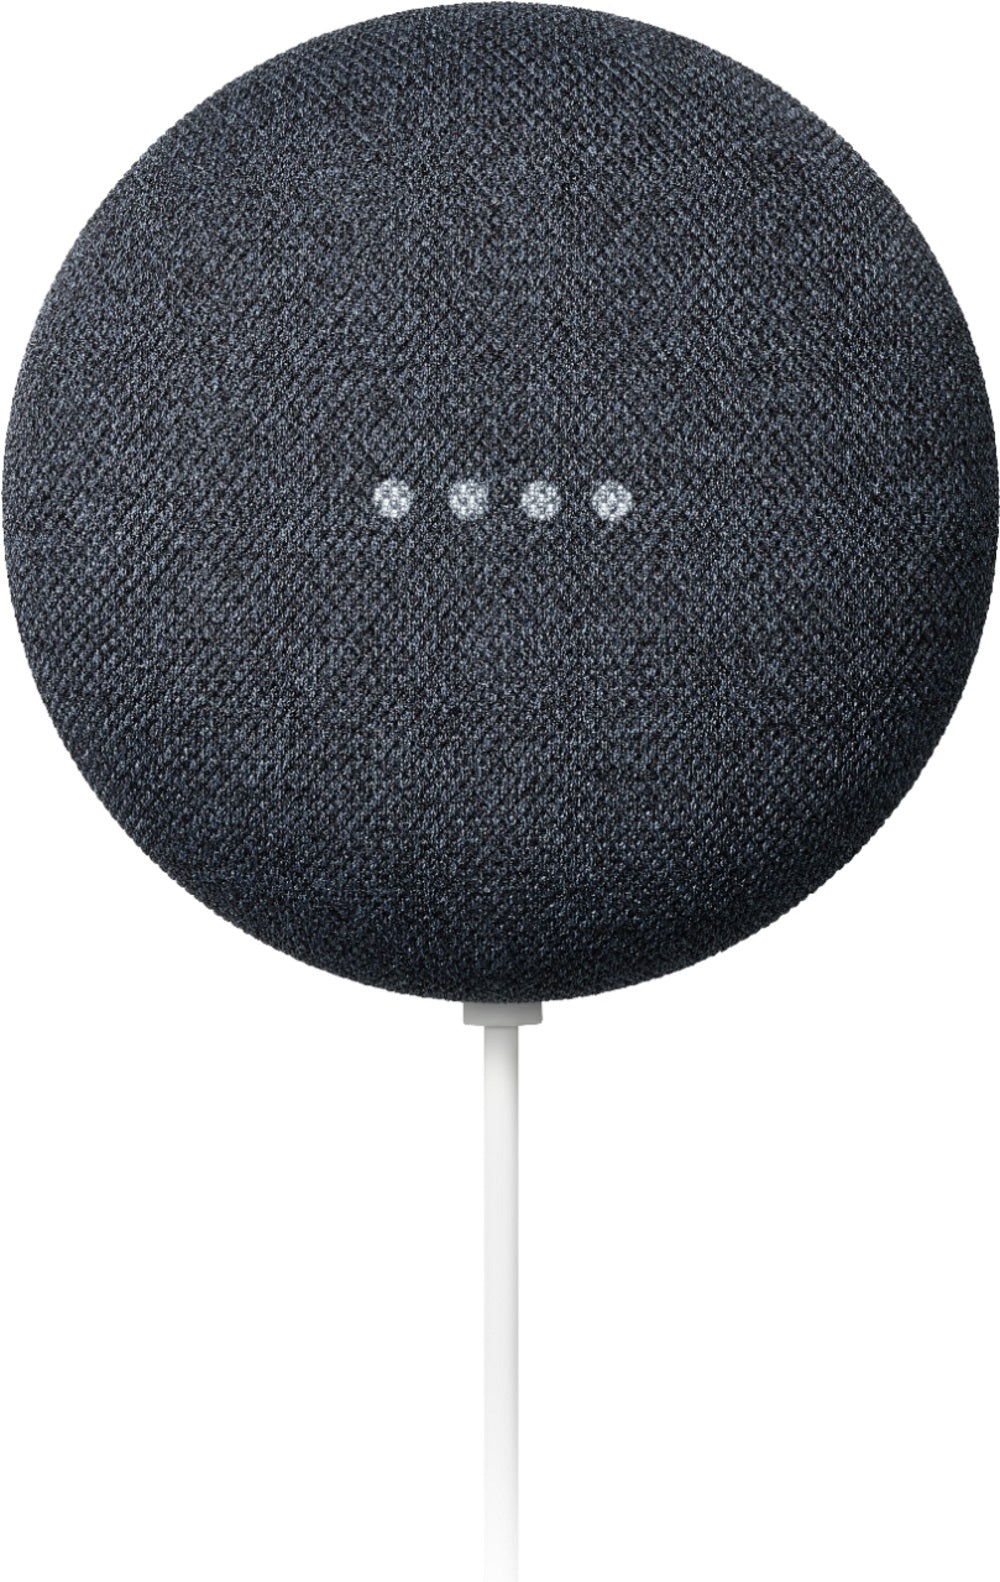 Google Nest Mini 2nd Generation Smart Speaker with Google Assistant - Charcoal (Pre-Owned)